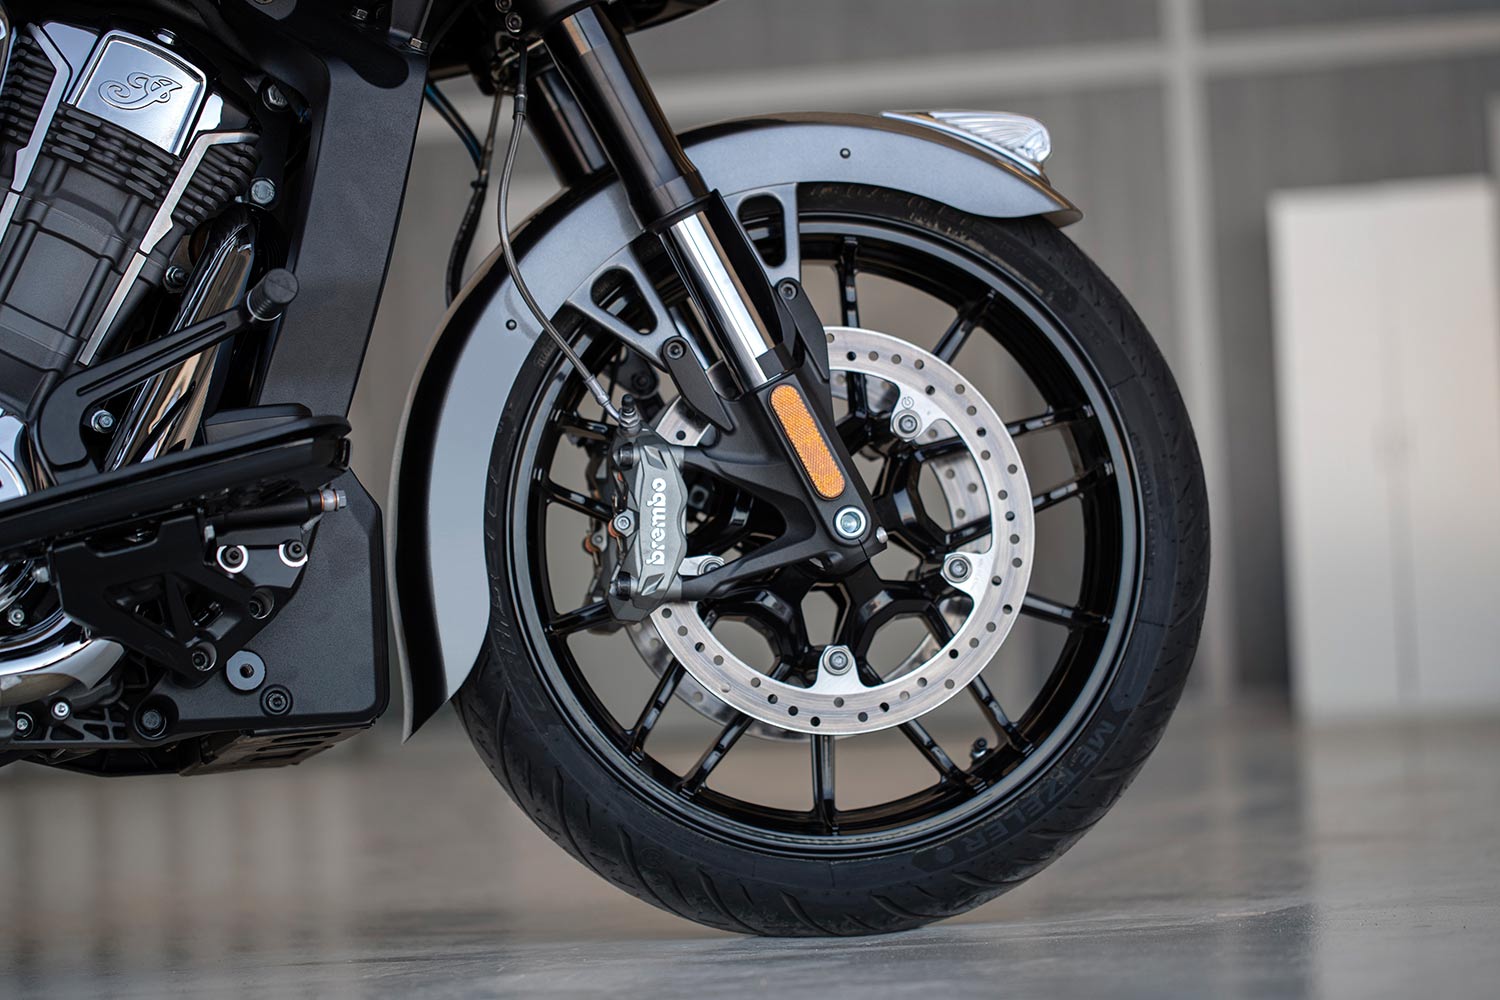 Dual front disc brakes and Brembo calipers on the 2020 Challenger bagger.